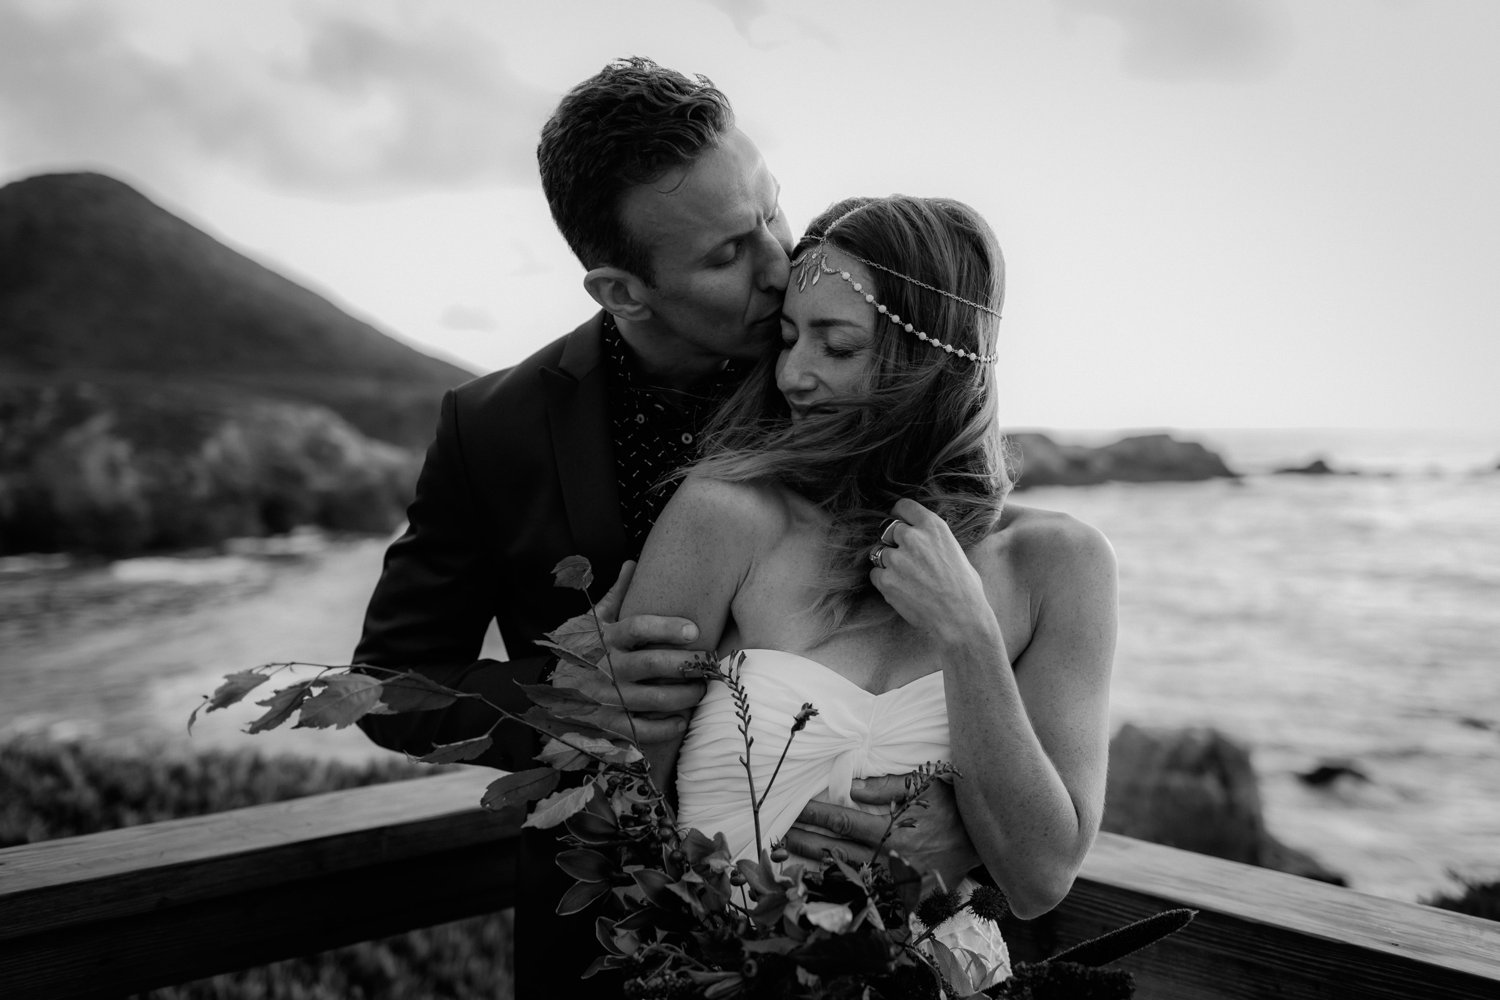 A black and white candid wedding photo by Catalina Jean Photography